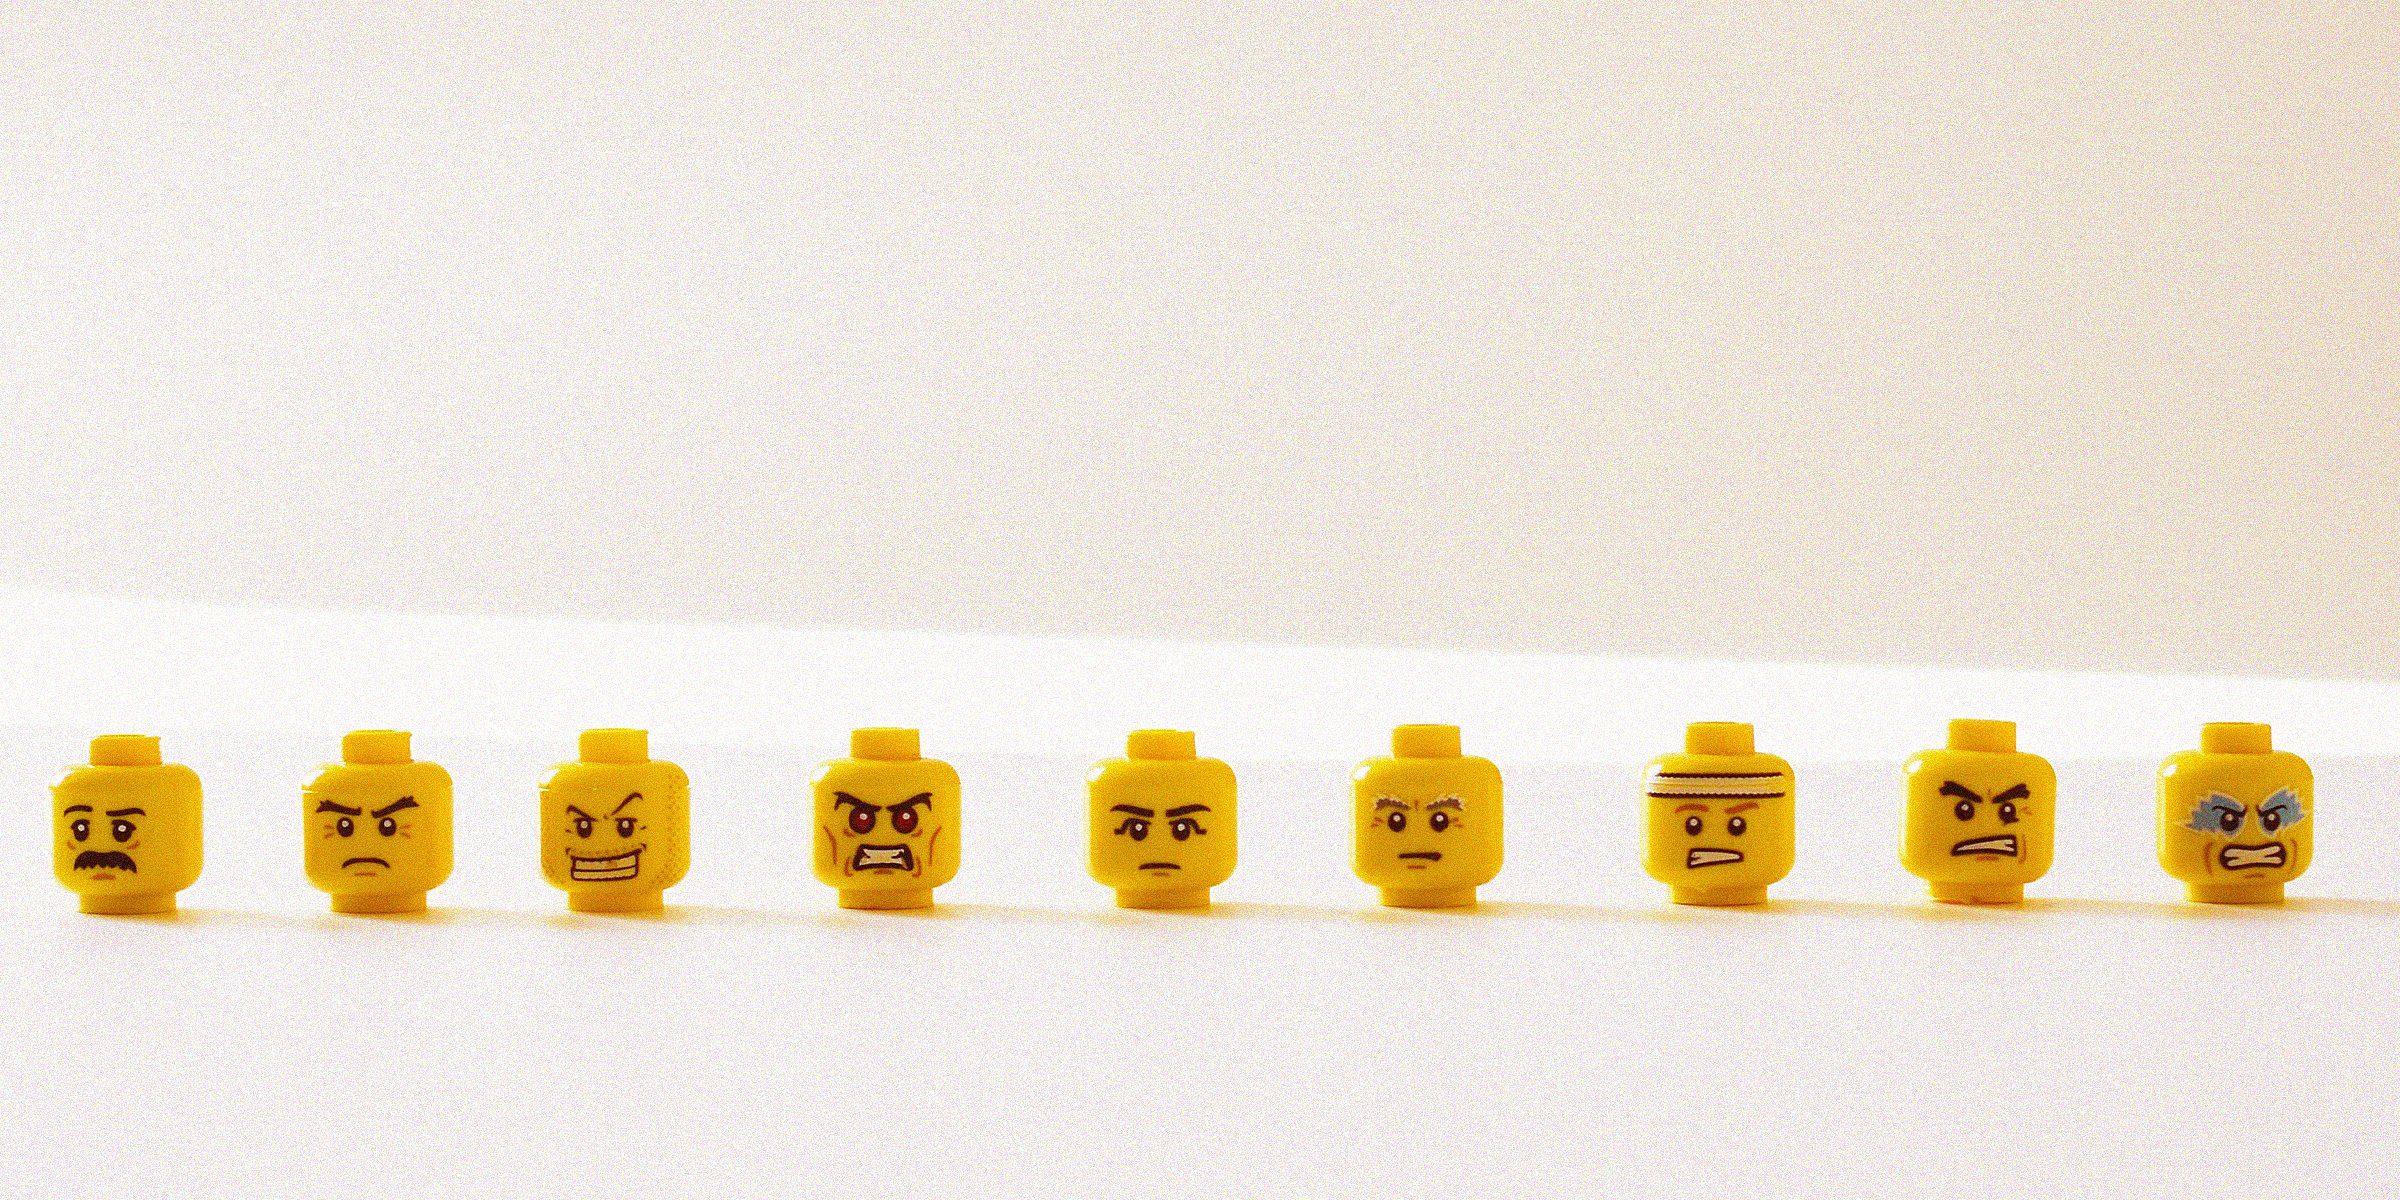 Unsplash | A line of lego faces with different facial expressions